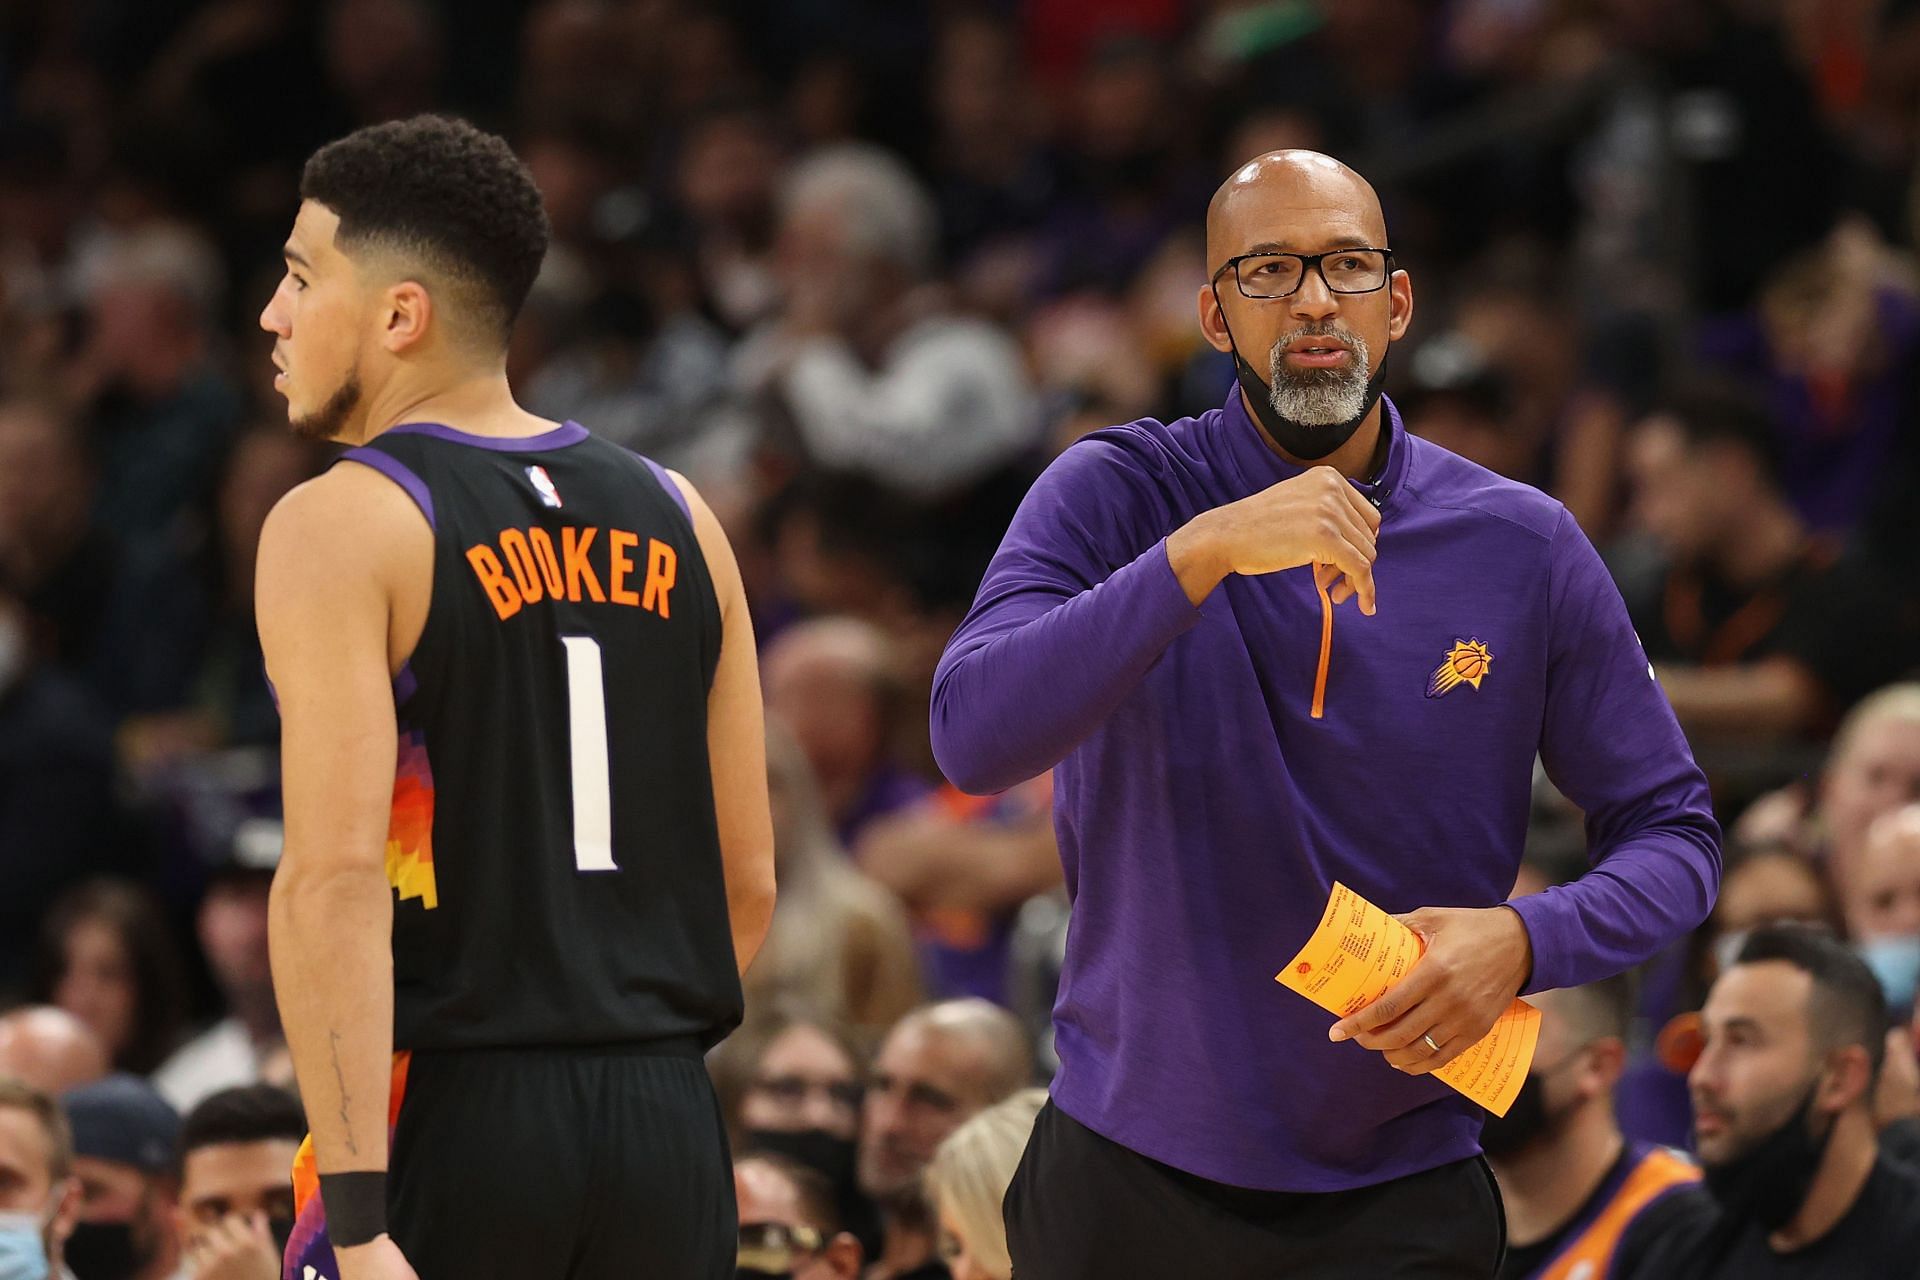 The Phoenix Suns lost their opening game against the Denver Nuggets.